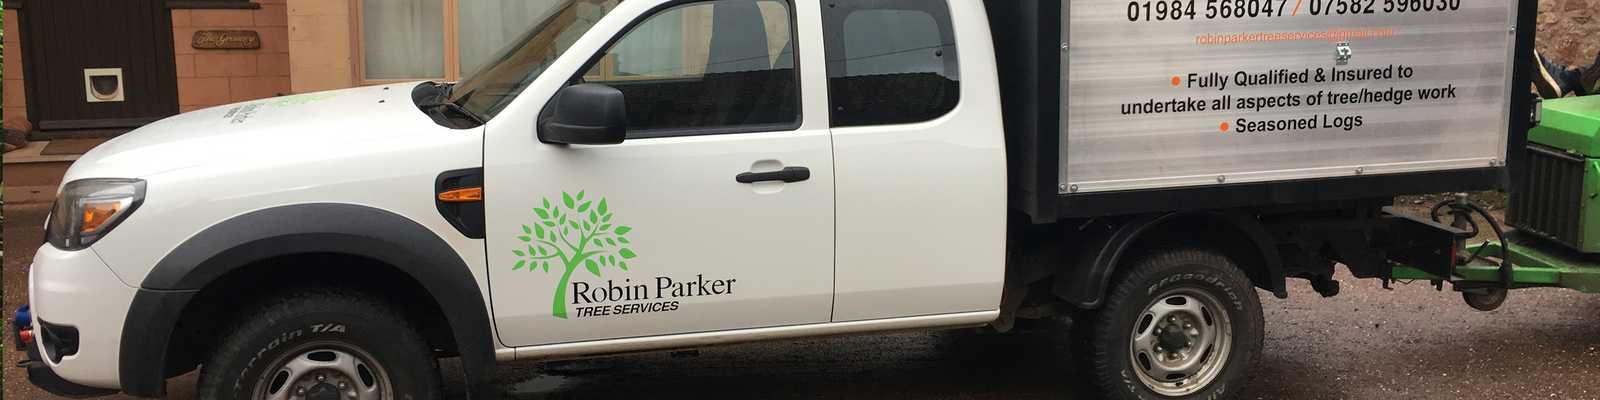 Domestic tree services with Robin Parker Tree Services vehicle